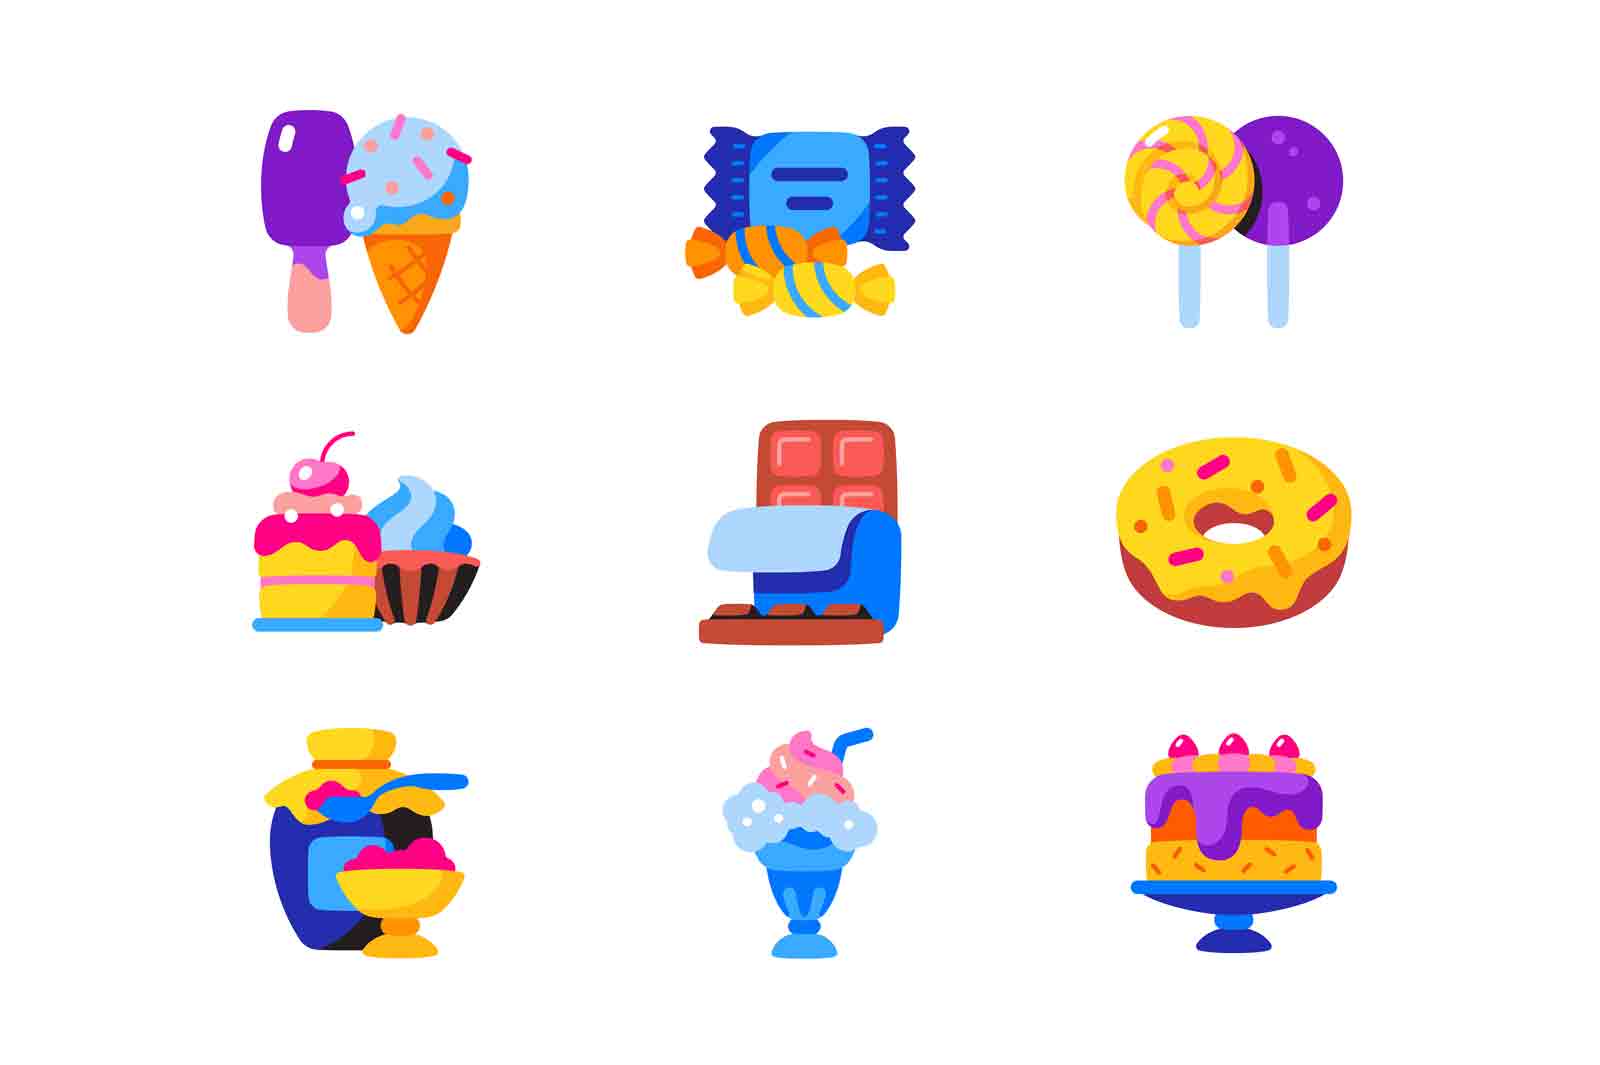 Sweet food icons set vector illustration. Cake, donut, cupcake, ice cream, chocolate and jam flat style concept